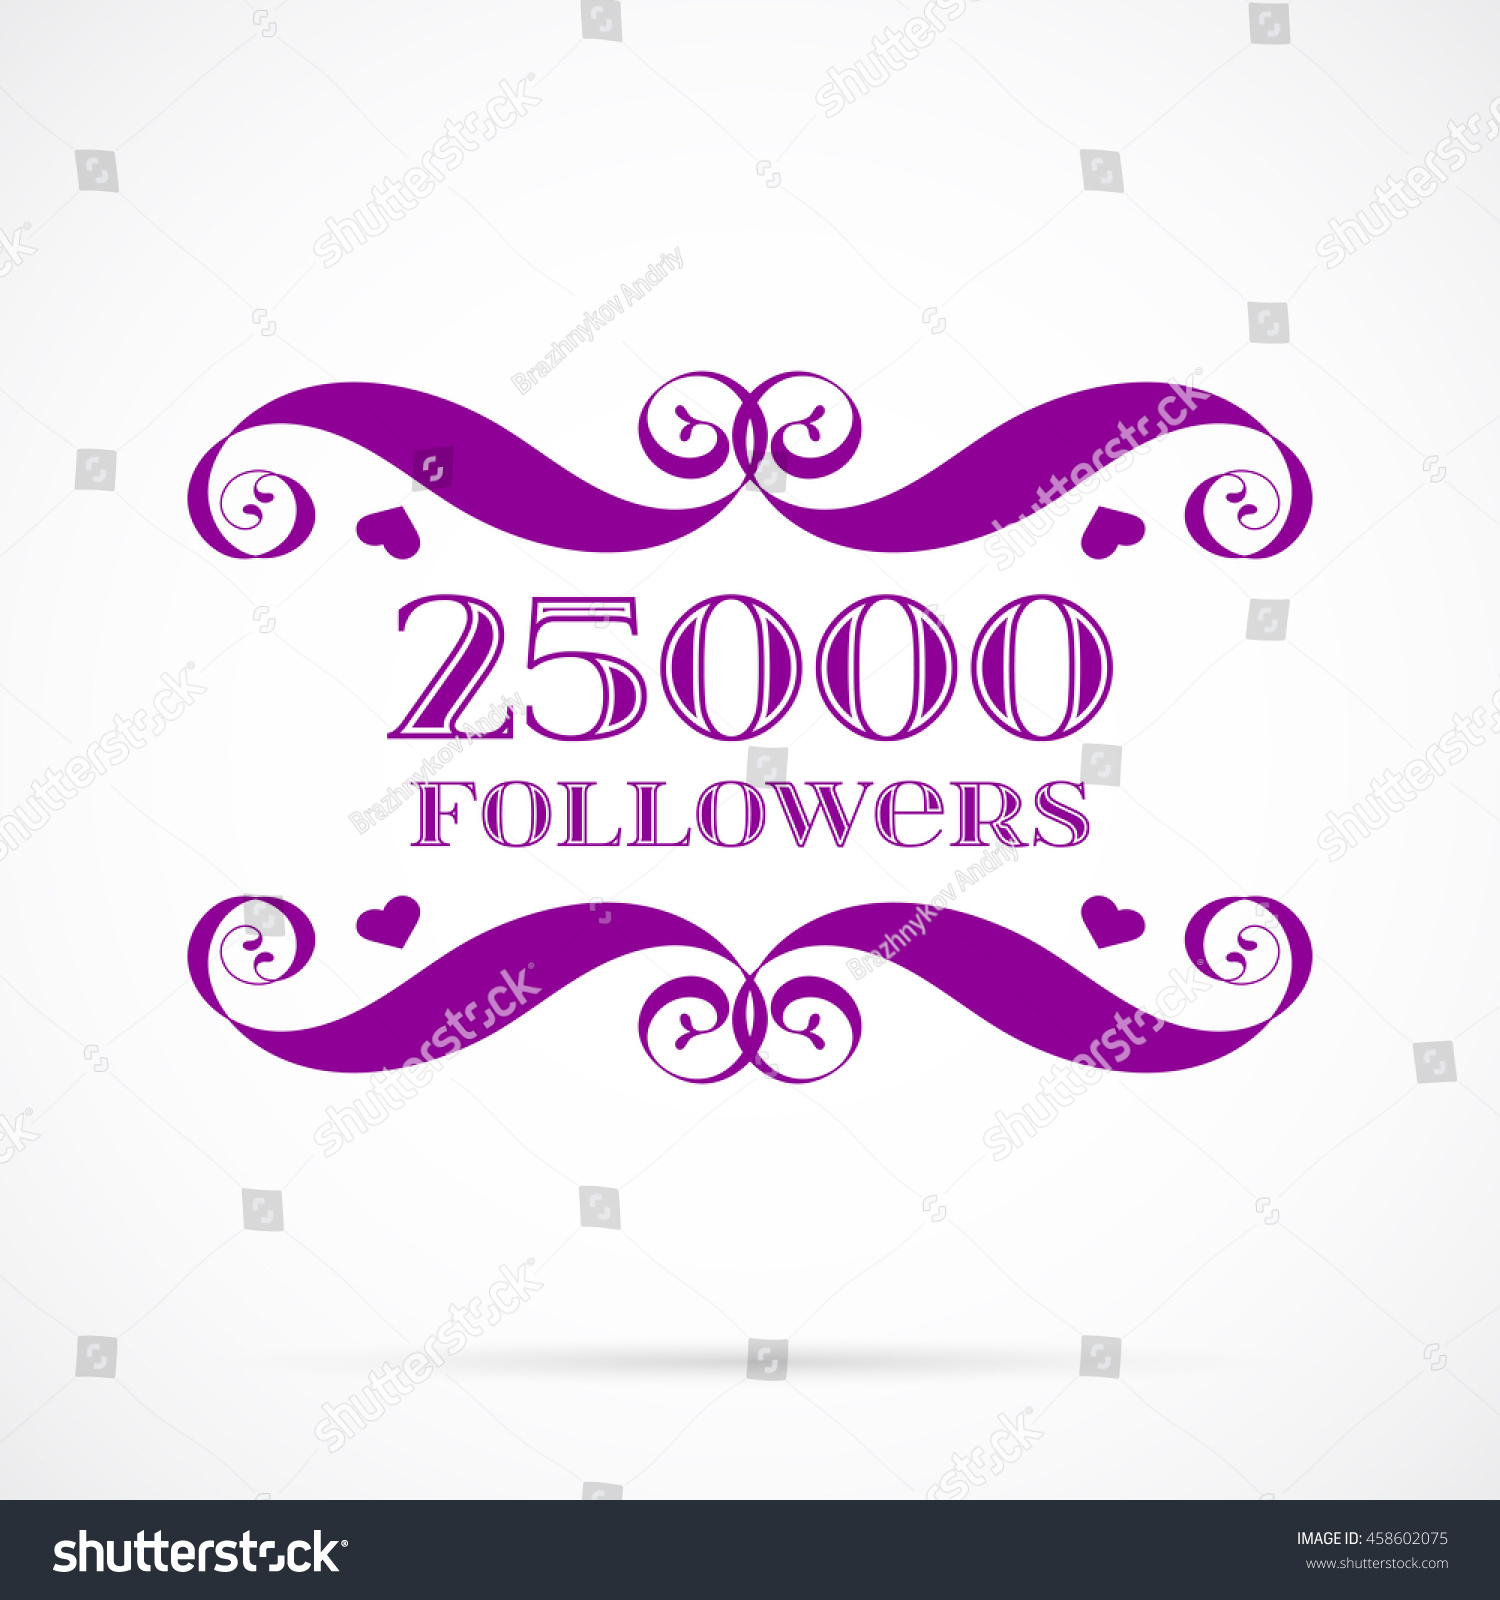 SVG of Vector 25000 followers badge over white. Easy use and recolor elements for your design. svg